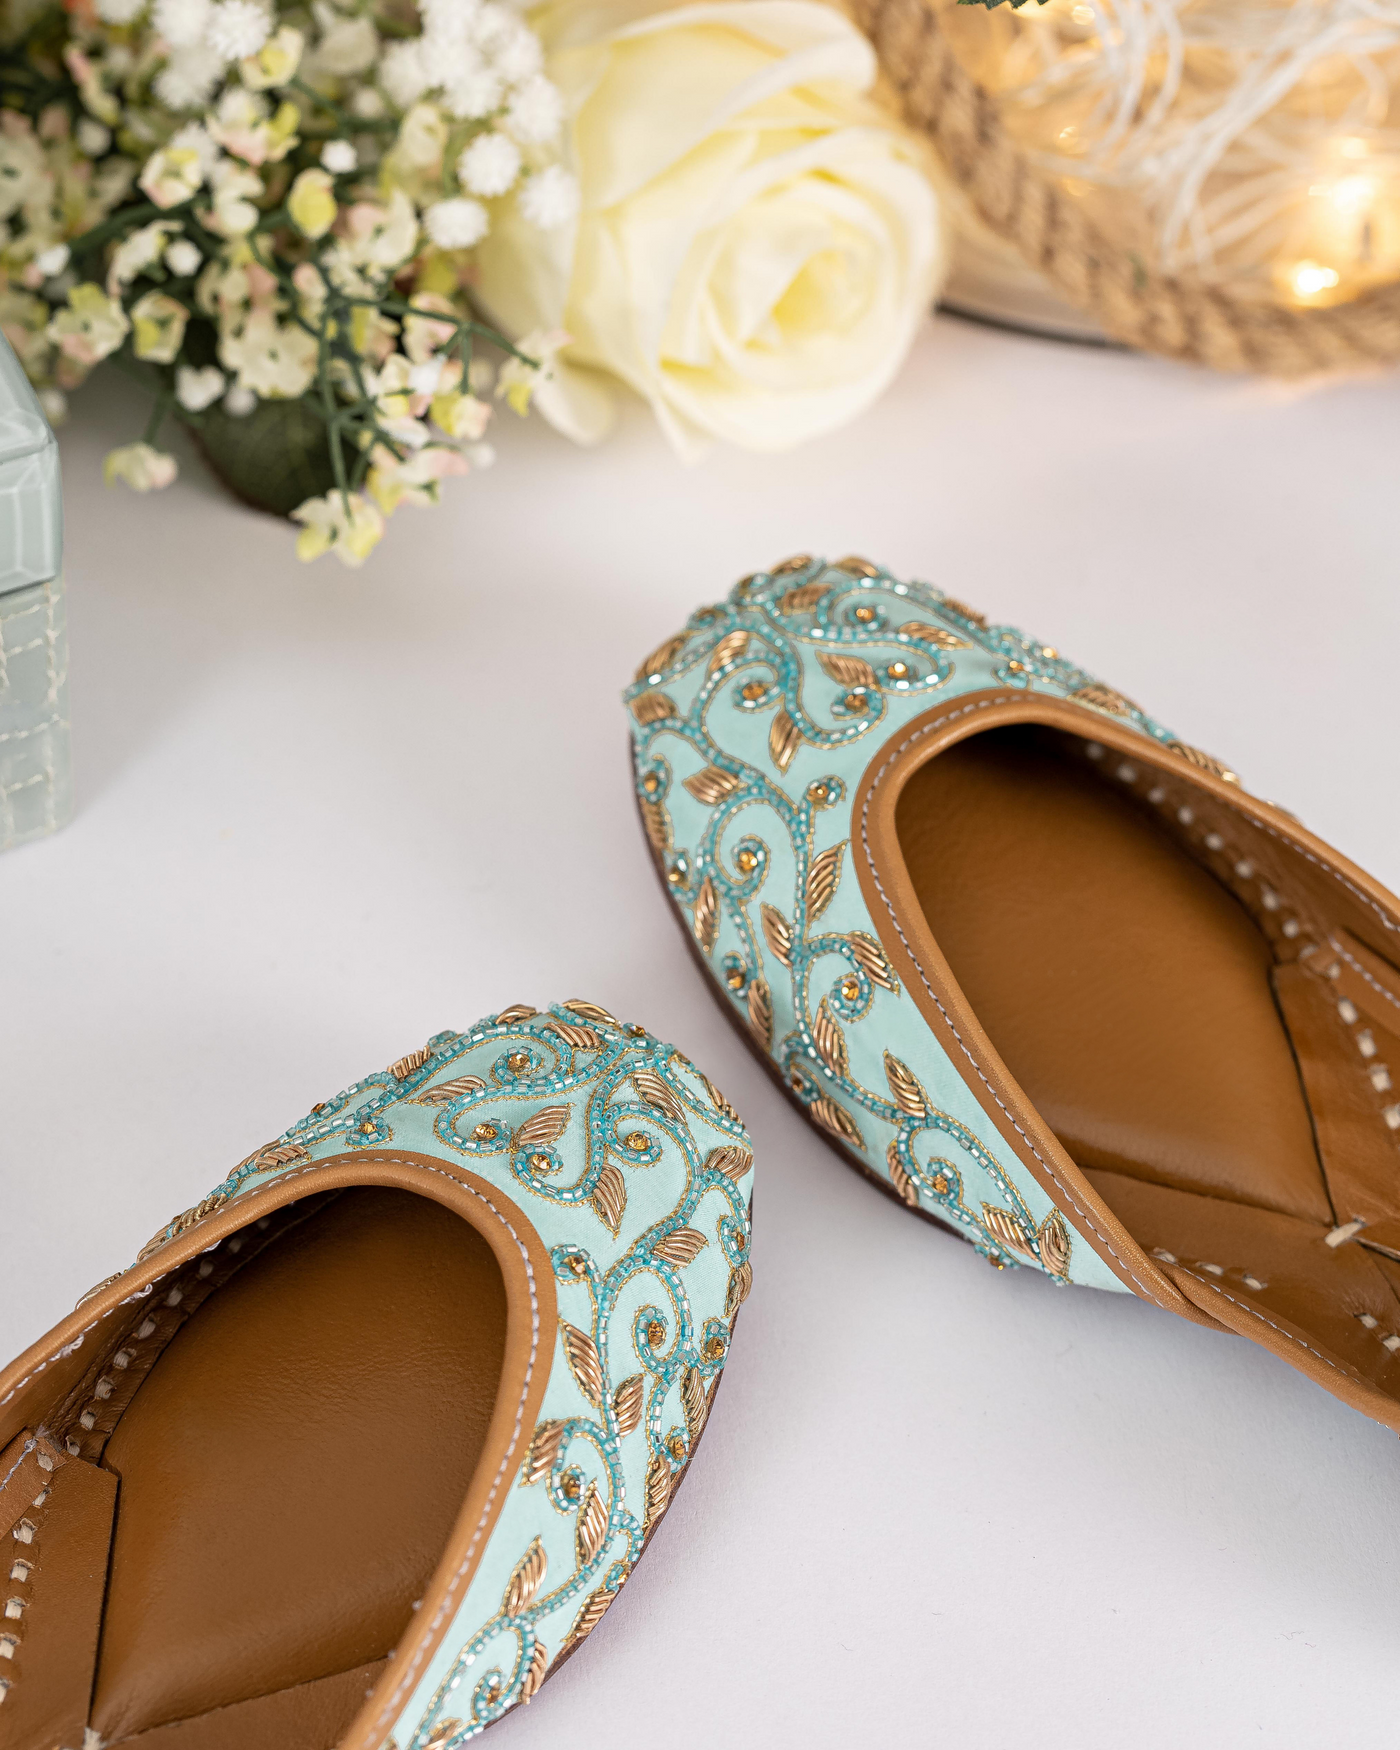 Mint Poppins Handcrafted Jutti